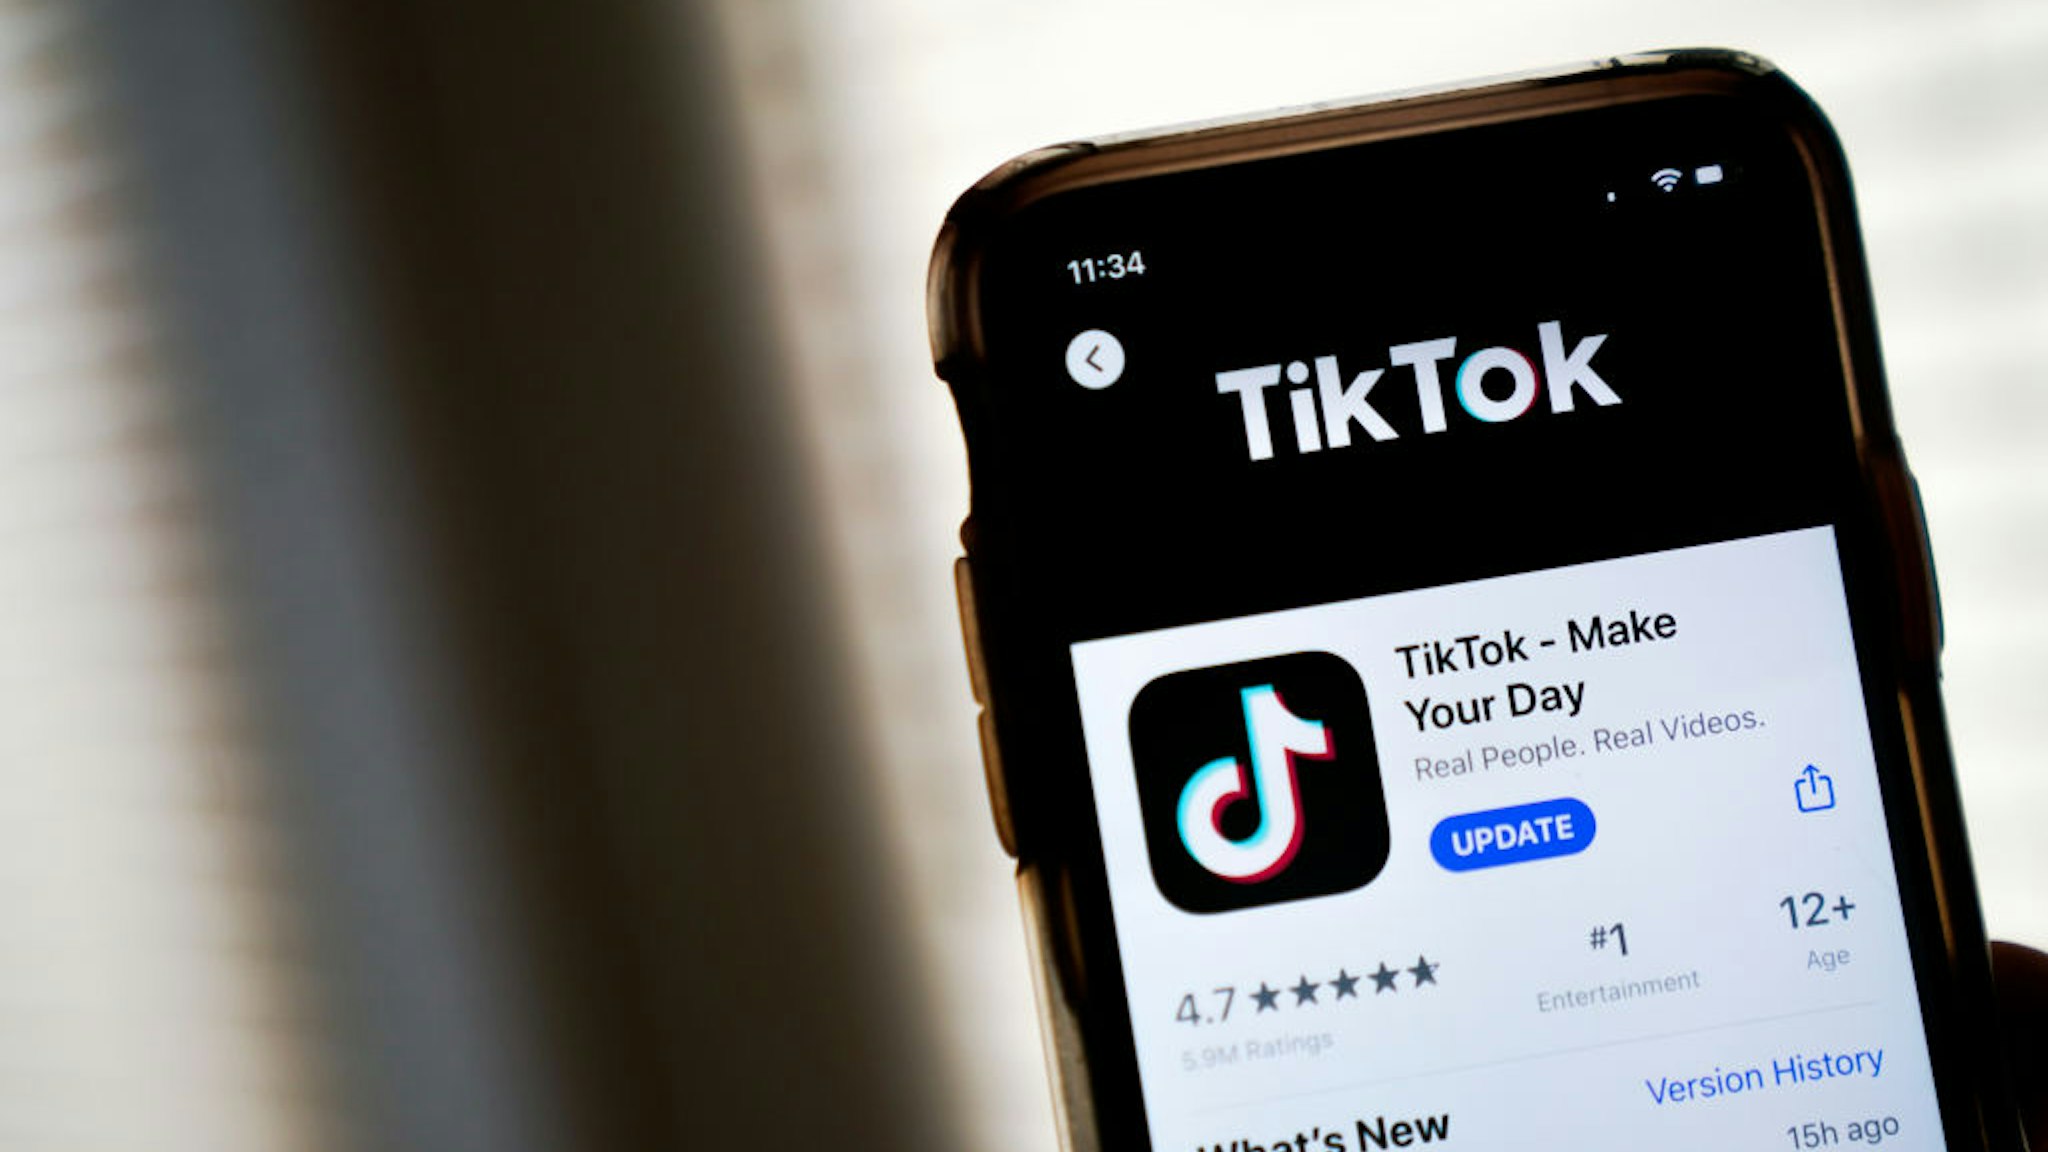 WASHINGTON, DC - AUGUST 07: In this photo illustration, the download page for the TikTok app is displayed on an Apple iPhone on August 7, 2020 in Washington, DC. On Thursday evening, President Donald Trump signed an executive order that bans any transactions between the parent company of TikTok, ByteDance, and U.S. citizens due to national security reasons. The president signed a separate executive order banning transactions with China-based tech company Tencent, which owns the app WeChat. Both orders are set to take effect in 45 days.